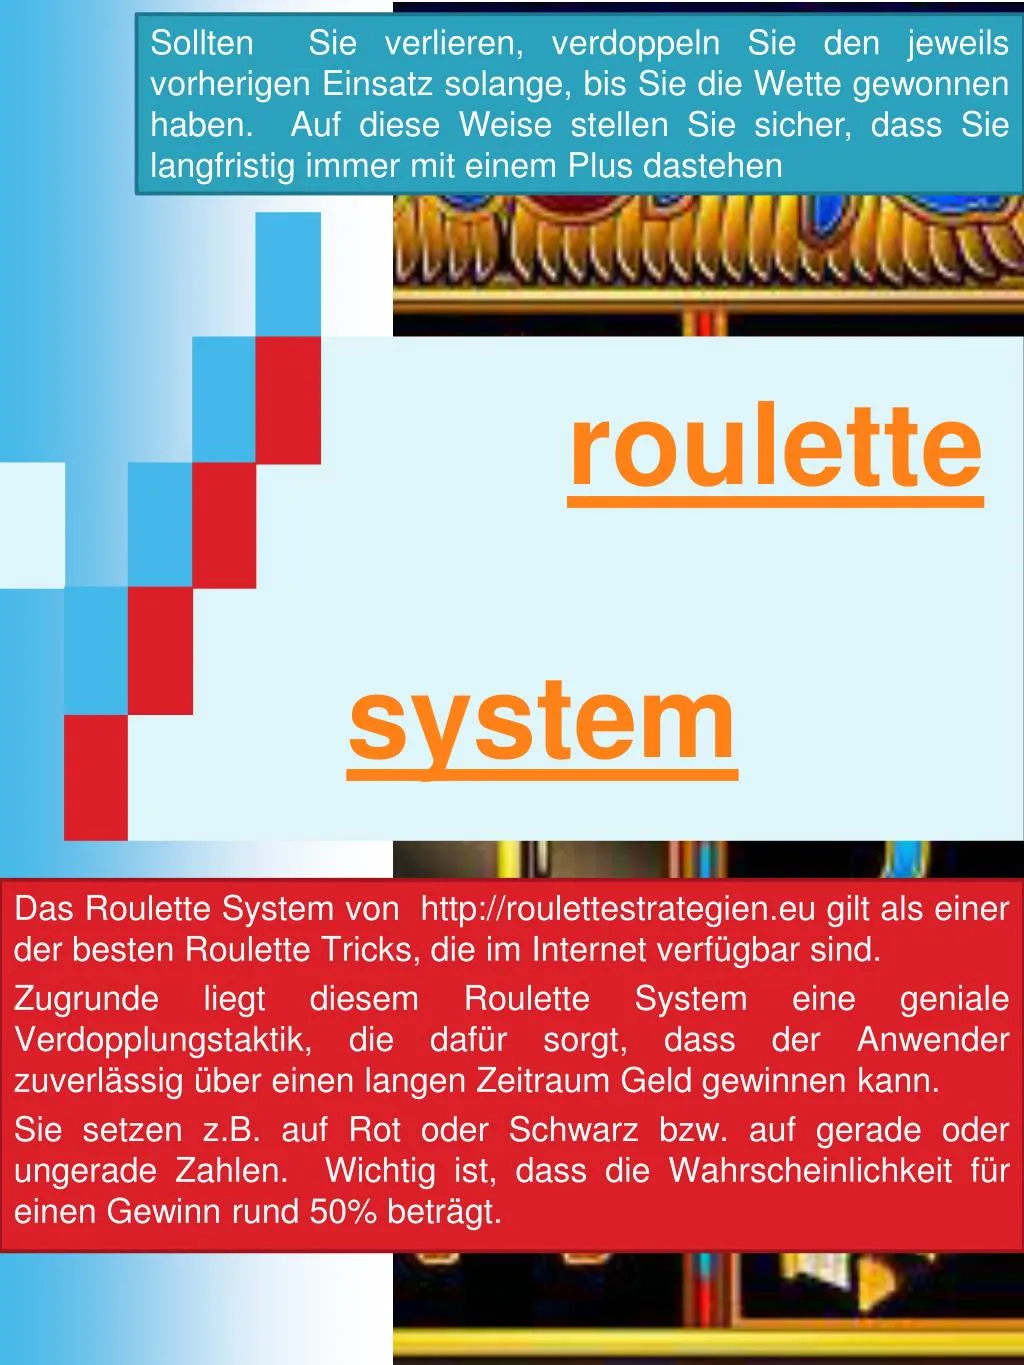 Funktionierendes Roulette System